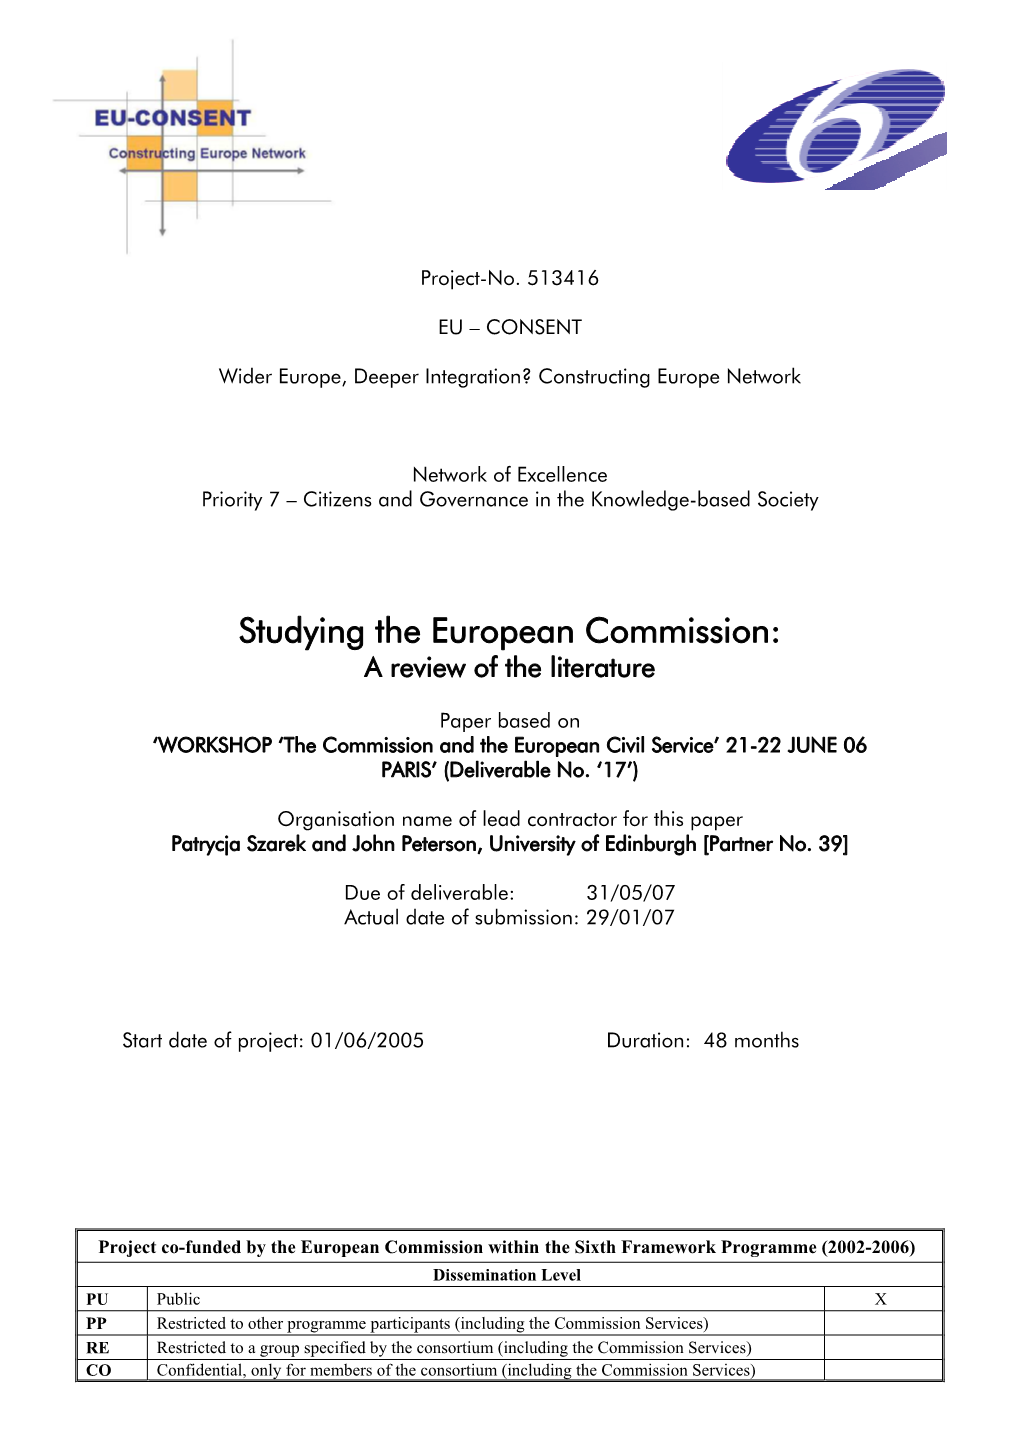 Studying the European Commission: a Review of the Literature